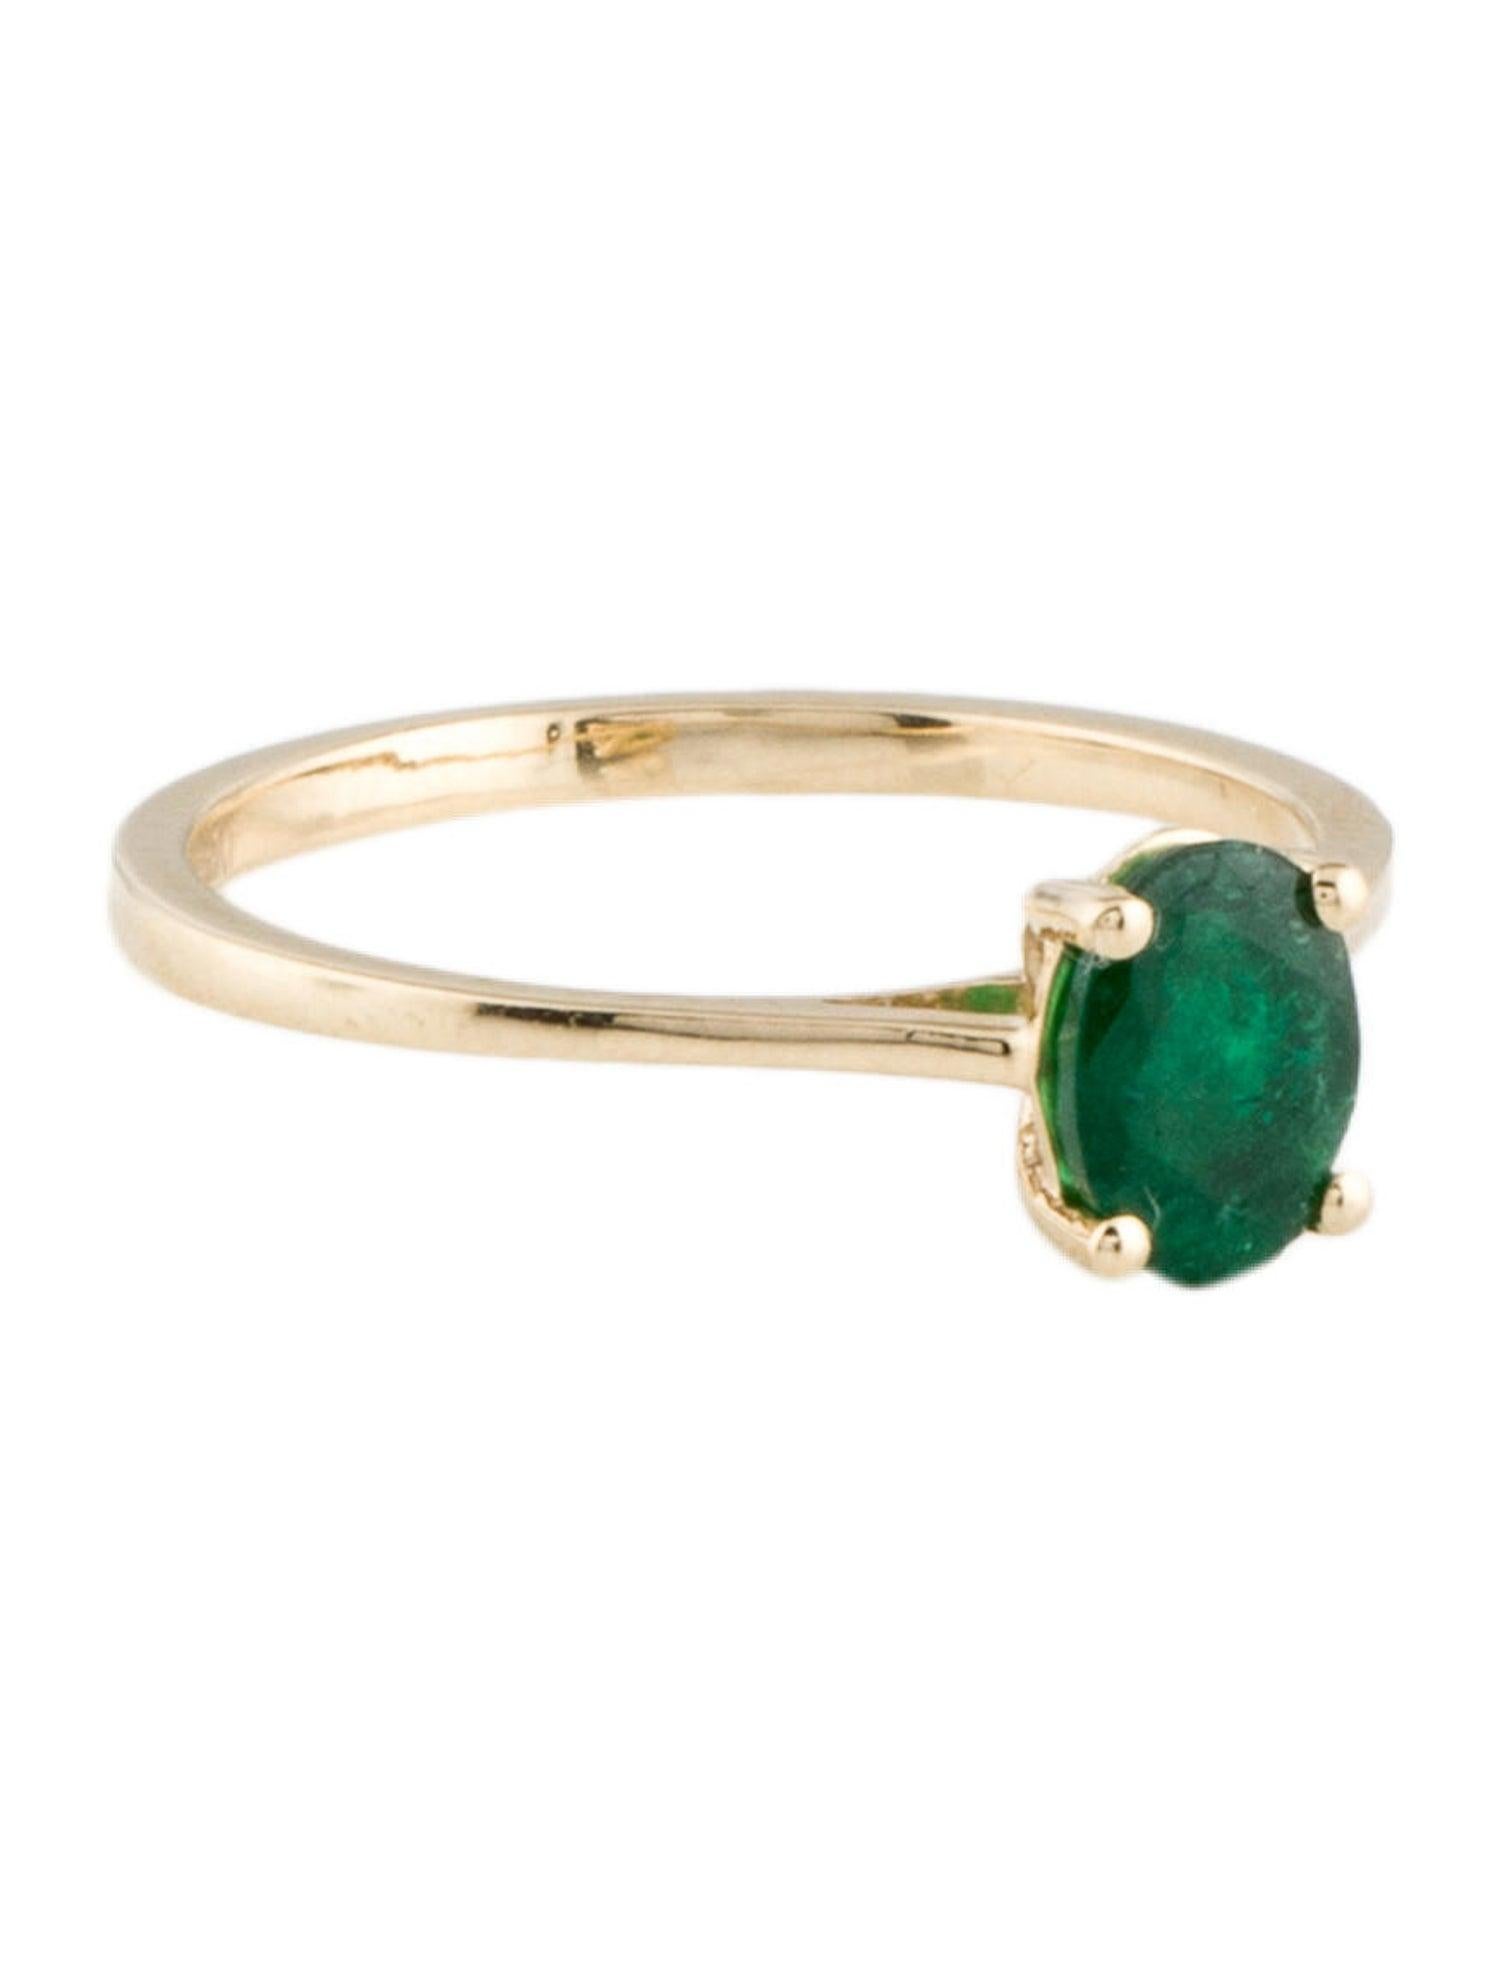 Immerse yourself in the ethereal allure of our Forest Ferns collection with this Enchanted Emerald Ring. This exquisite piece showcases a magnificent emerald, its deep green hue reminiscent of the lush forests that adorn our world. Crafted with